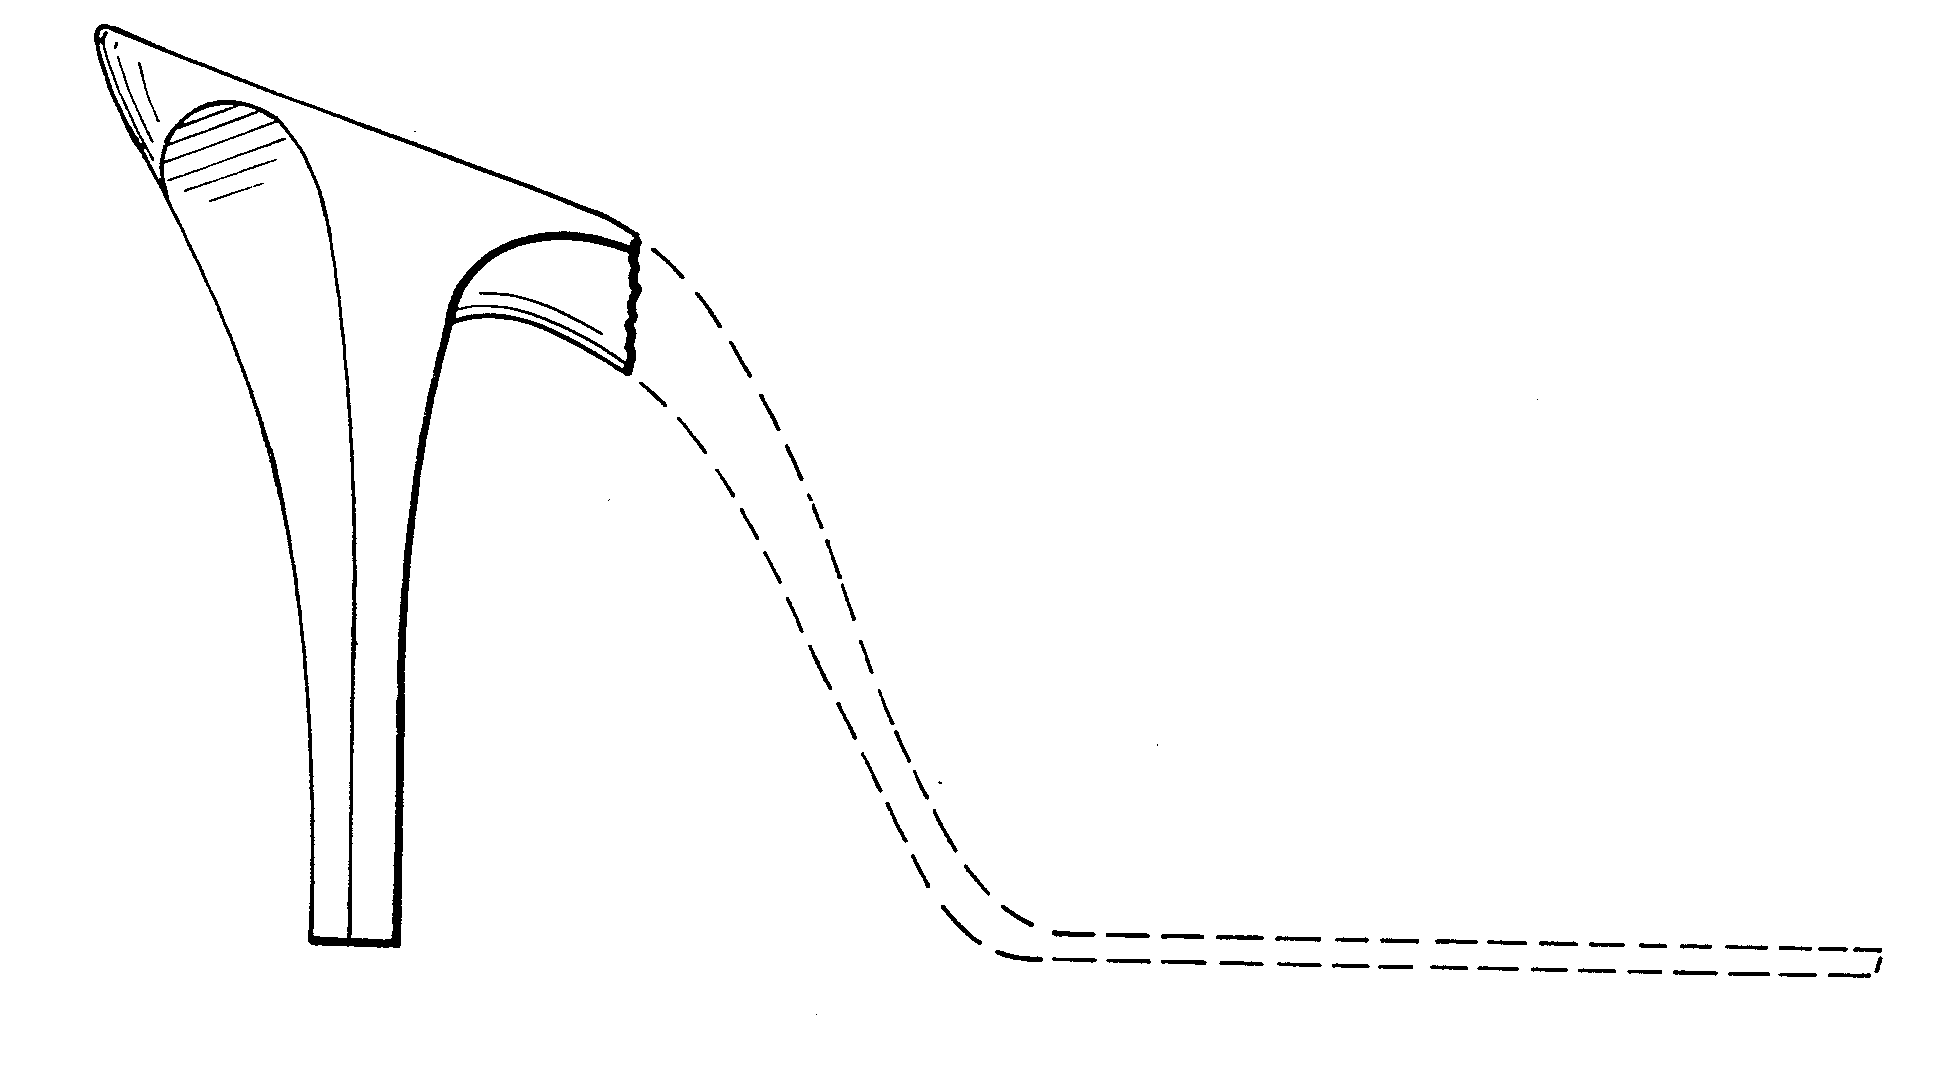 A typical example a spike or stilletto heel.
